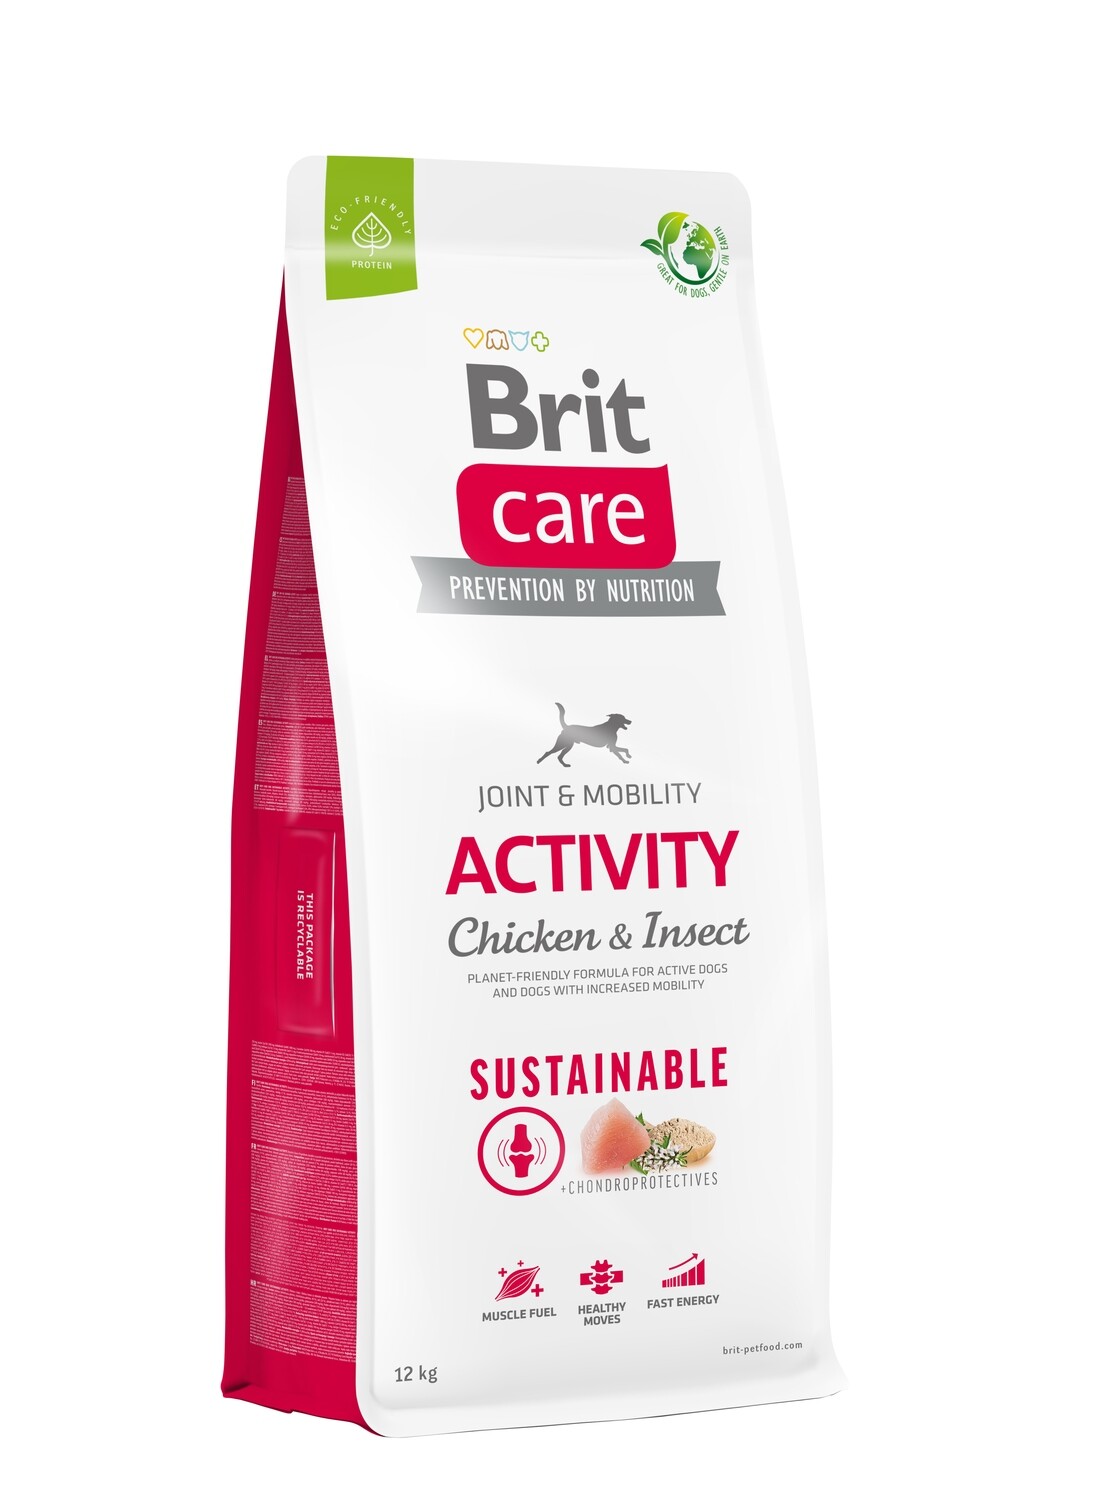 Brit Care - Sustainable - Activity 12 kg